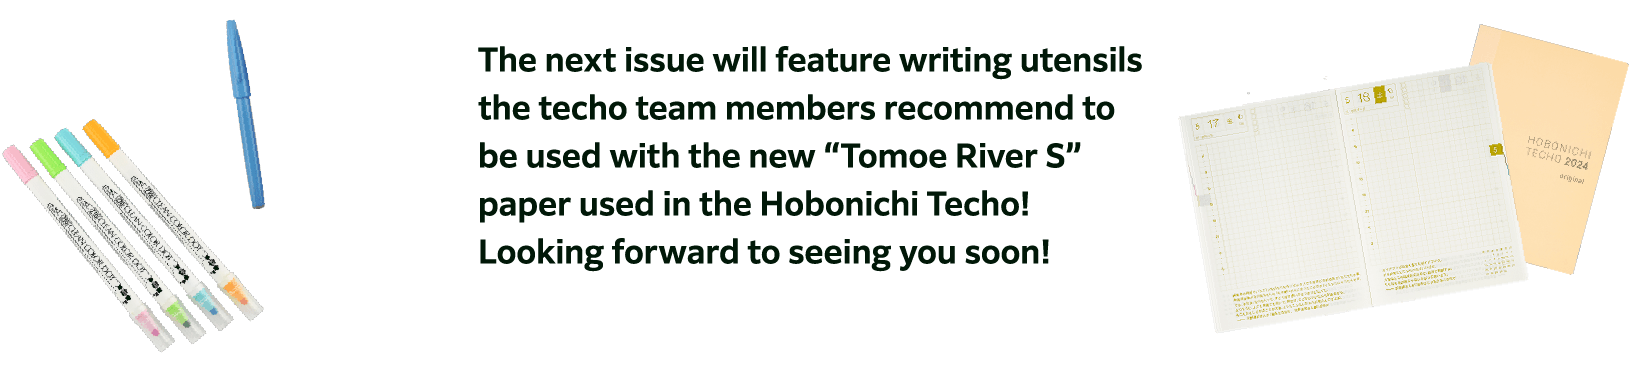 The next issue will feature writing utensils the techo team members recommend to be used with the new “Tomoe River S” paper used in the Hobonichi Techo! Looking forward to seeing you soon!